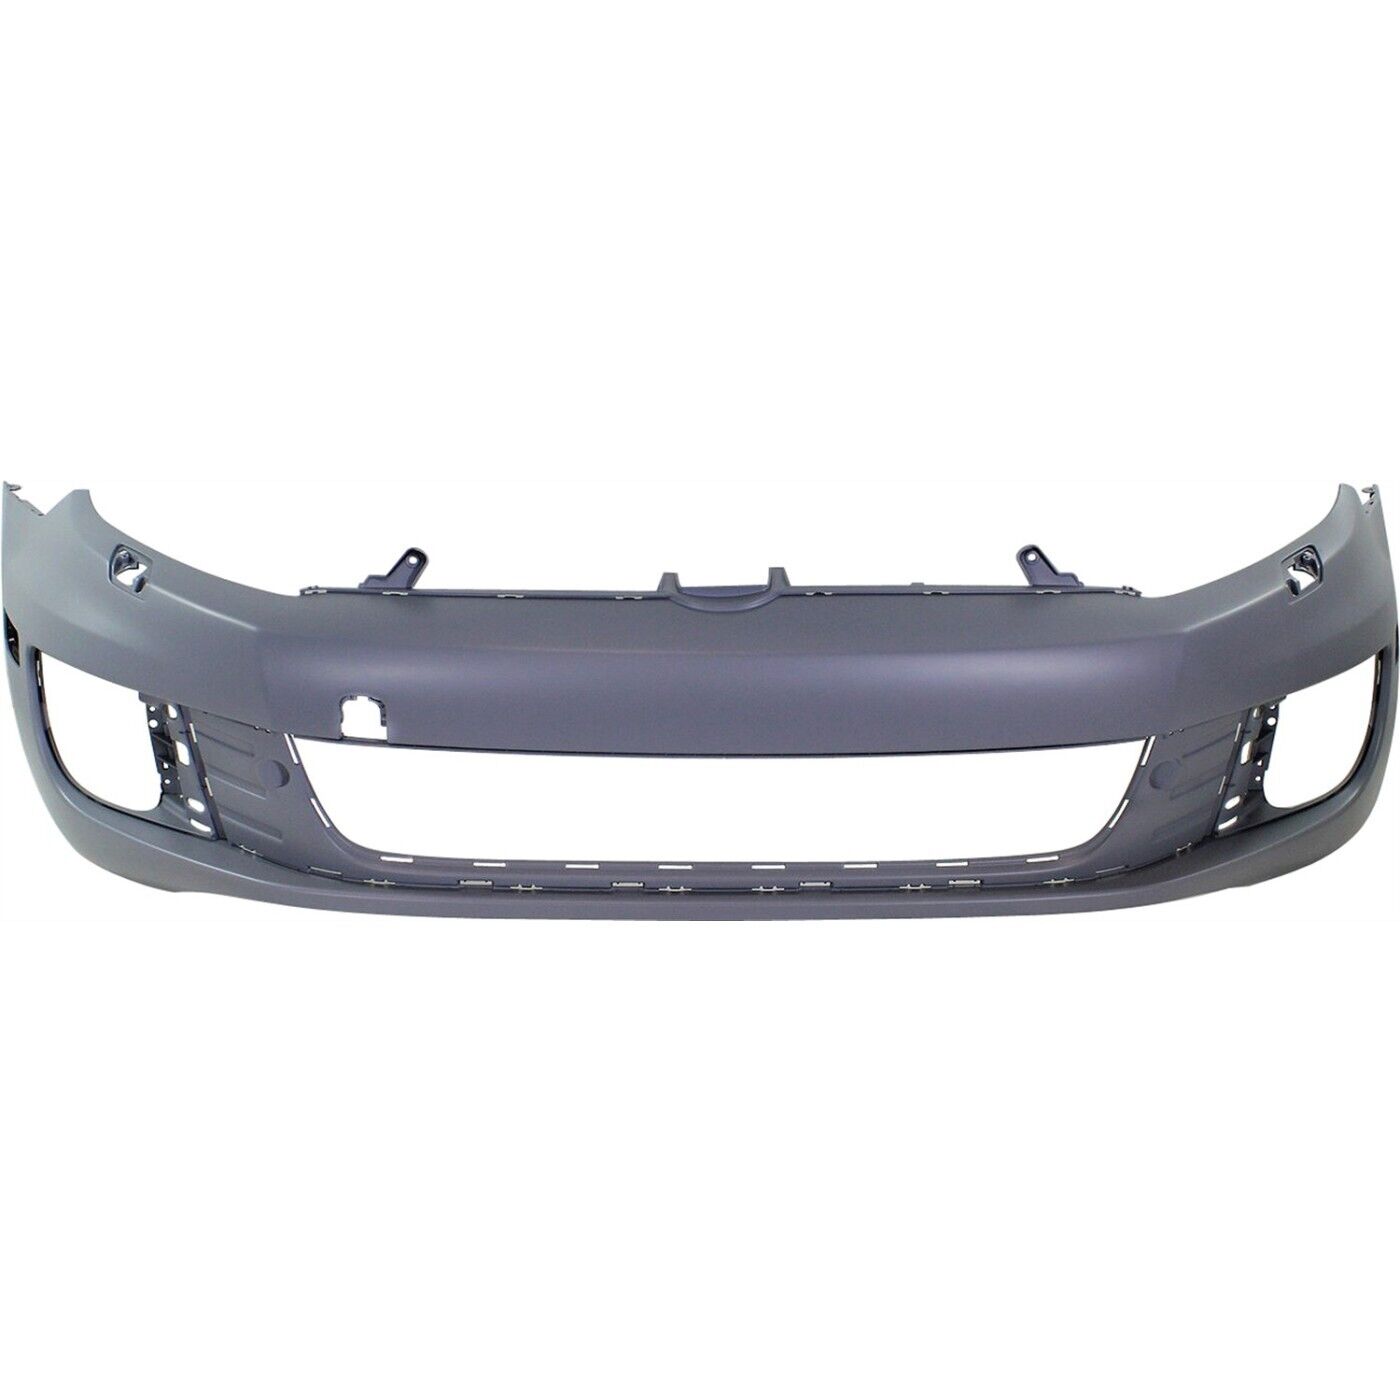 Bumper Cover For 2010-2014 Volkswagen Golf With Headlight Washer Holes Front